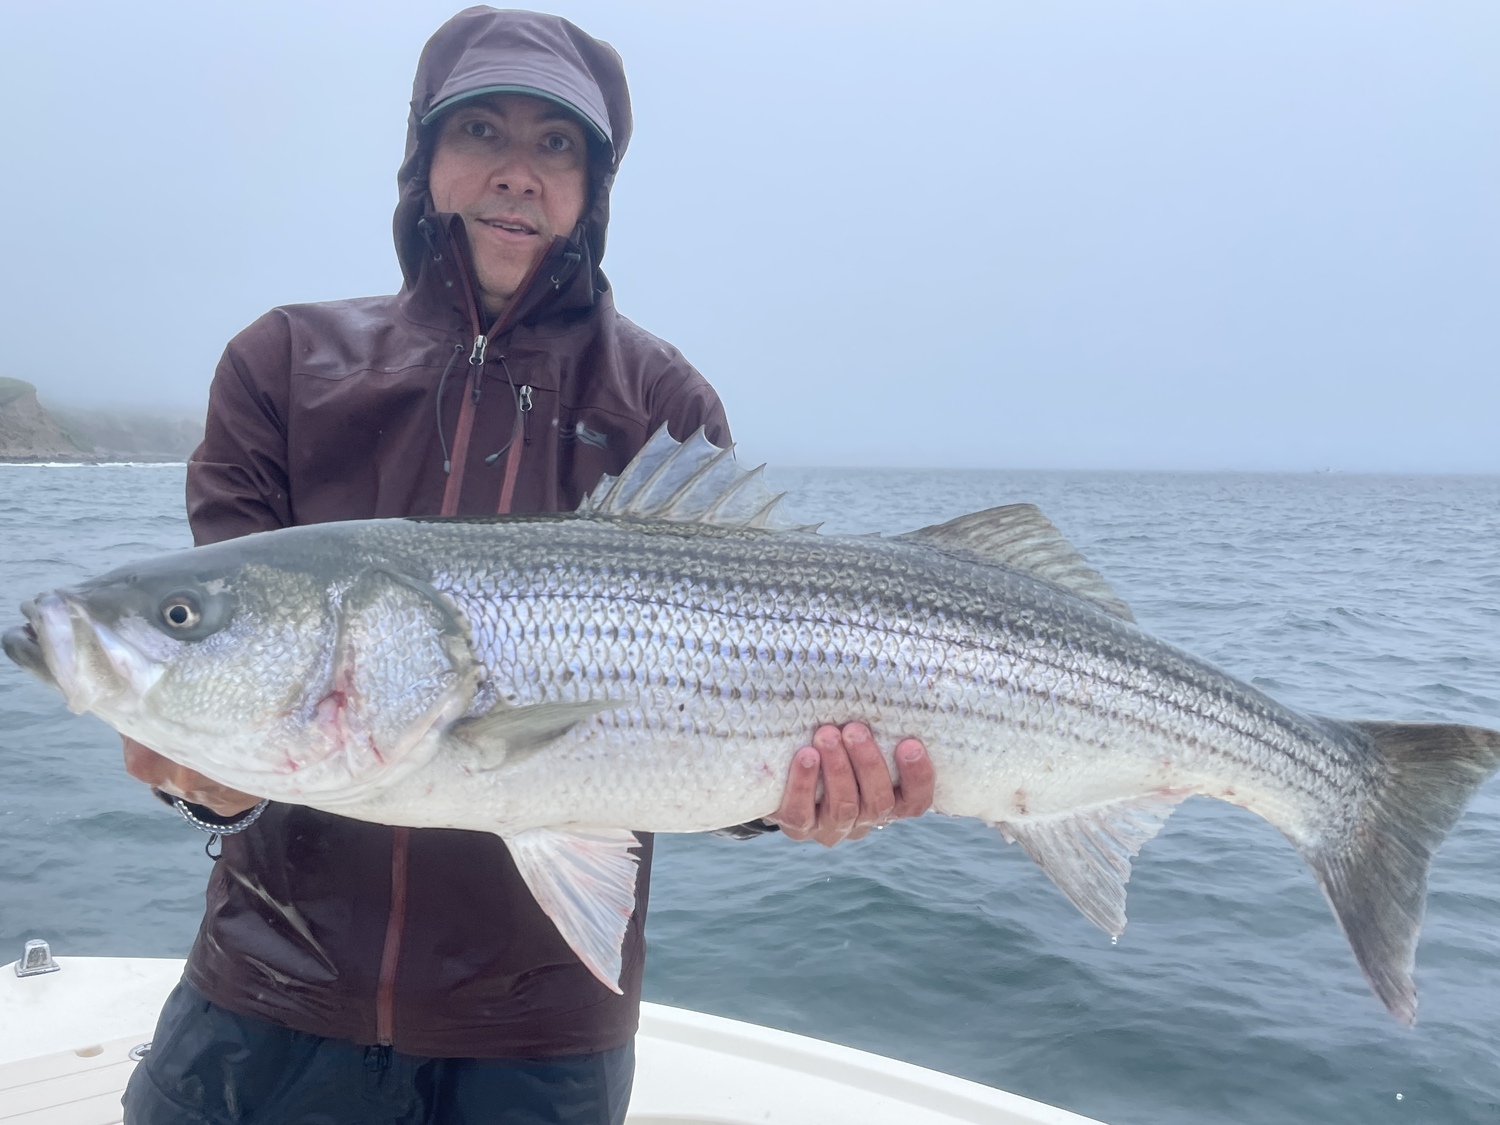 Restrictions on striped bass harvest are needed to protect the fishery for the years to come. Friday, December 22, is the last day to make your thoughts known on how new rules should be crafted. TODD RICHTER